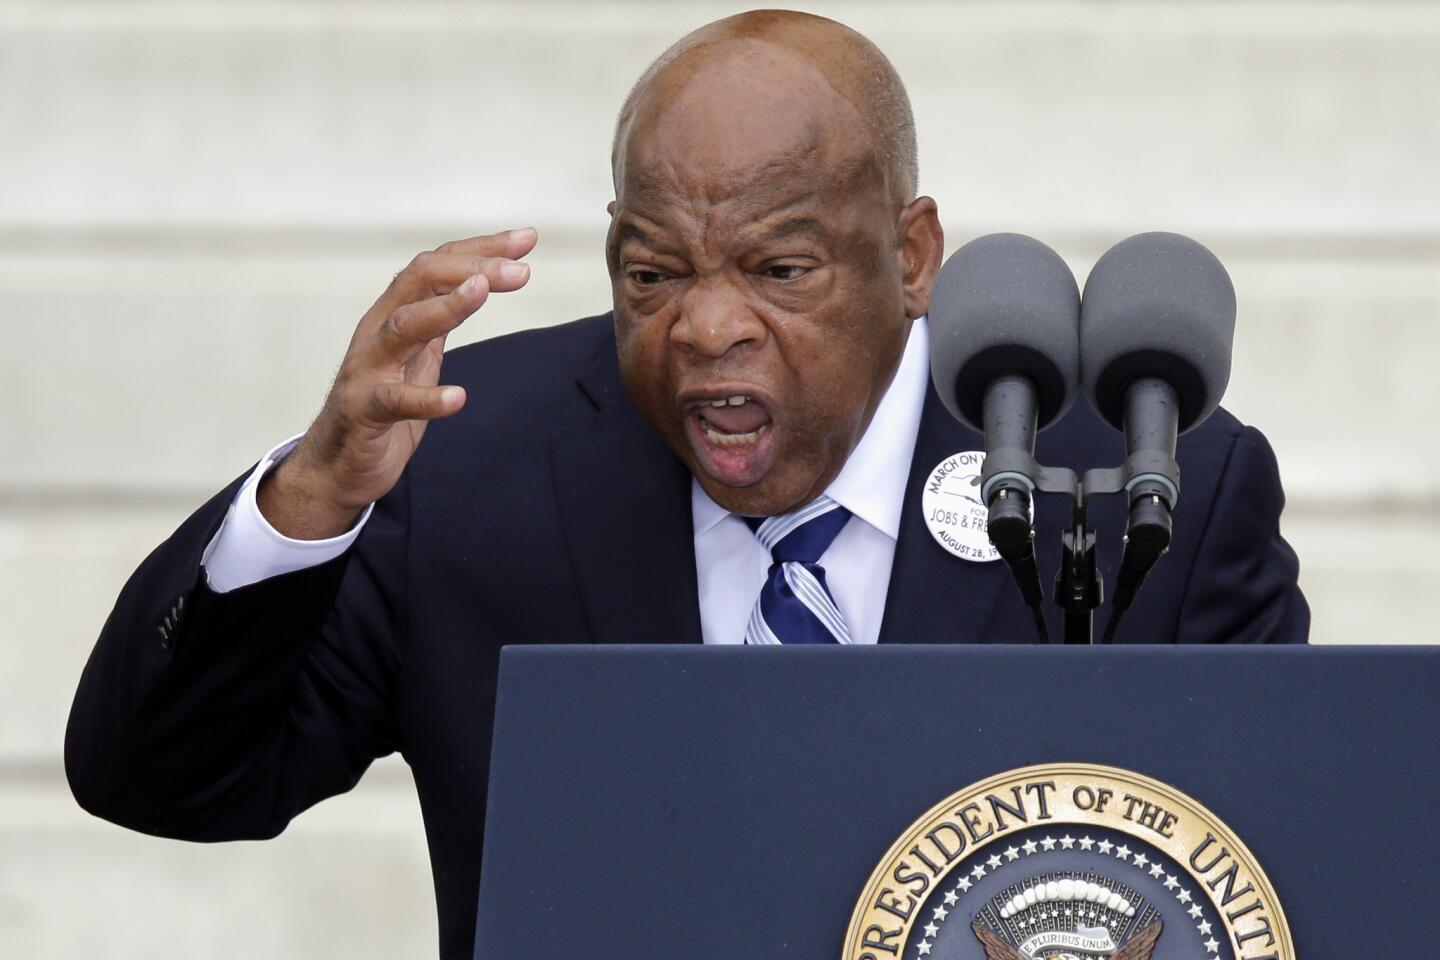 Rep. John Lewis gestures emphatically while speaking at a lectern during a commemoration of the March on Washington